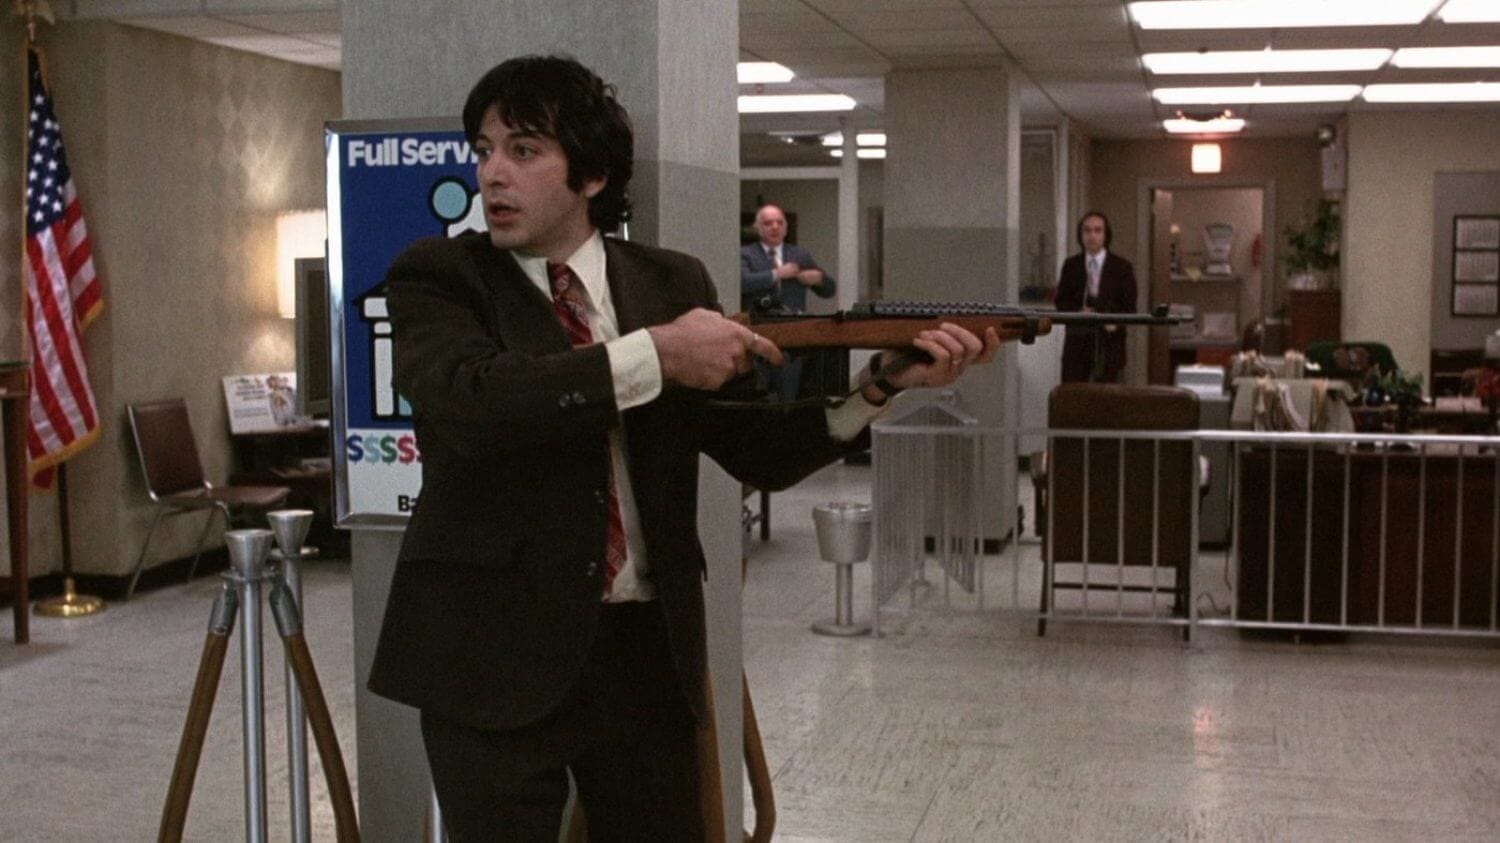 10 places of robberies from movies and series : Bank - Dog Day afternoon